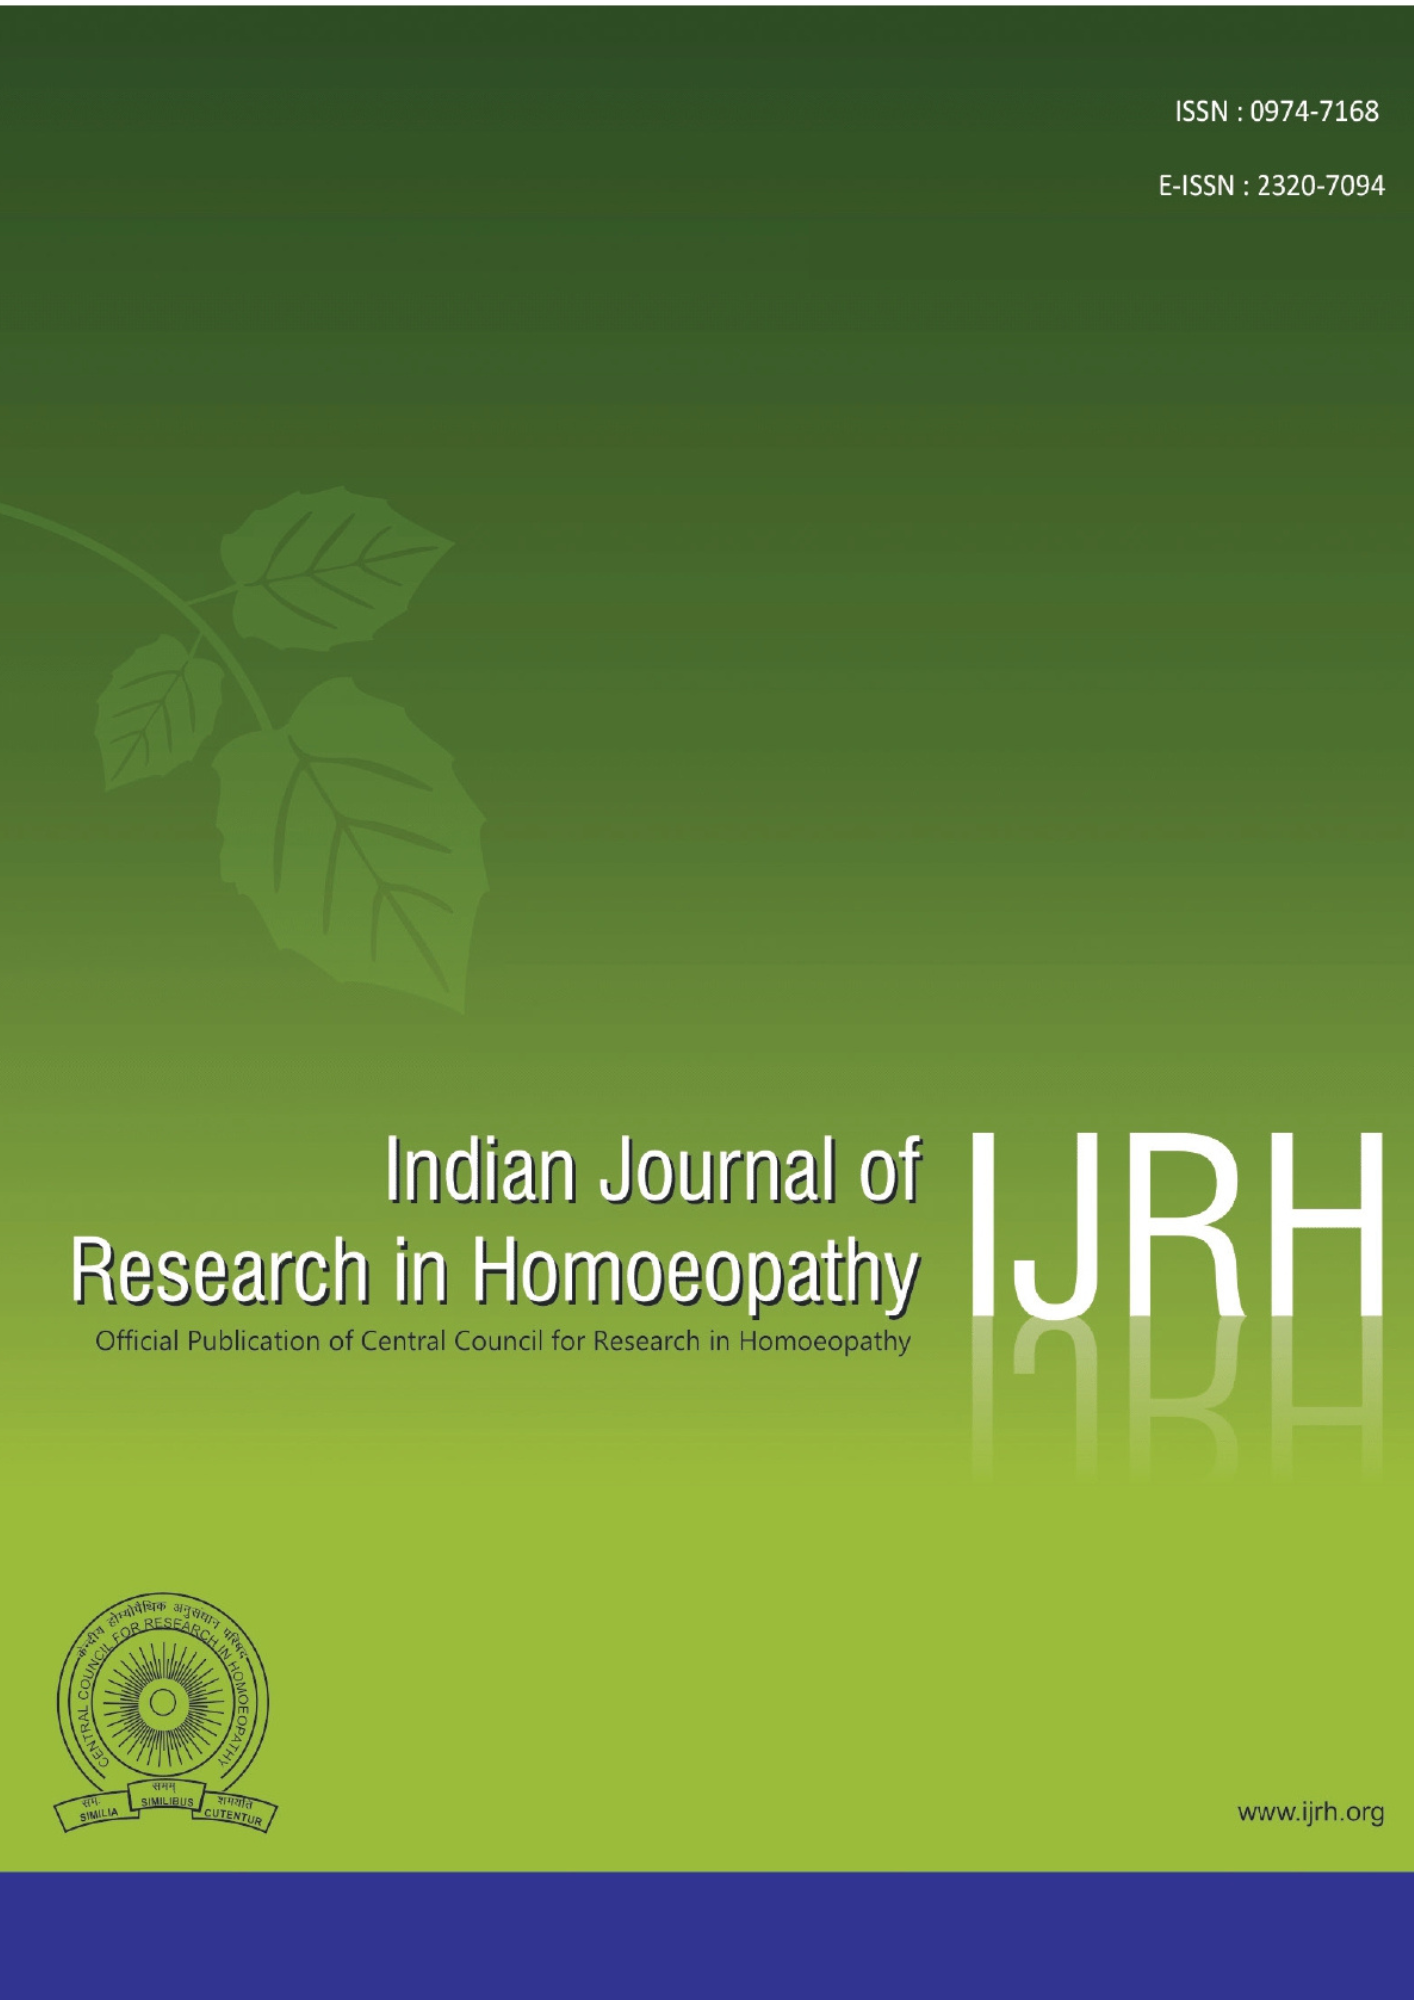 Indian Journal of Research in Homoeopathy cover art